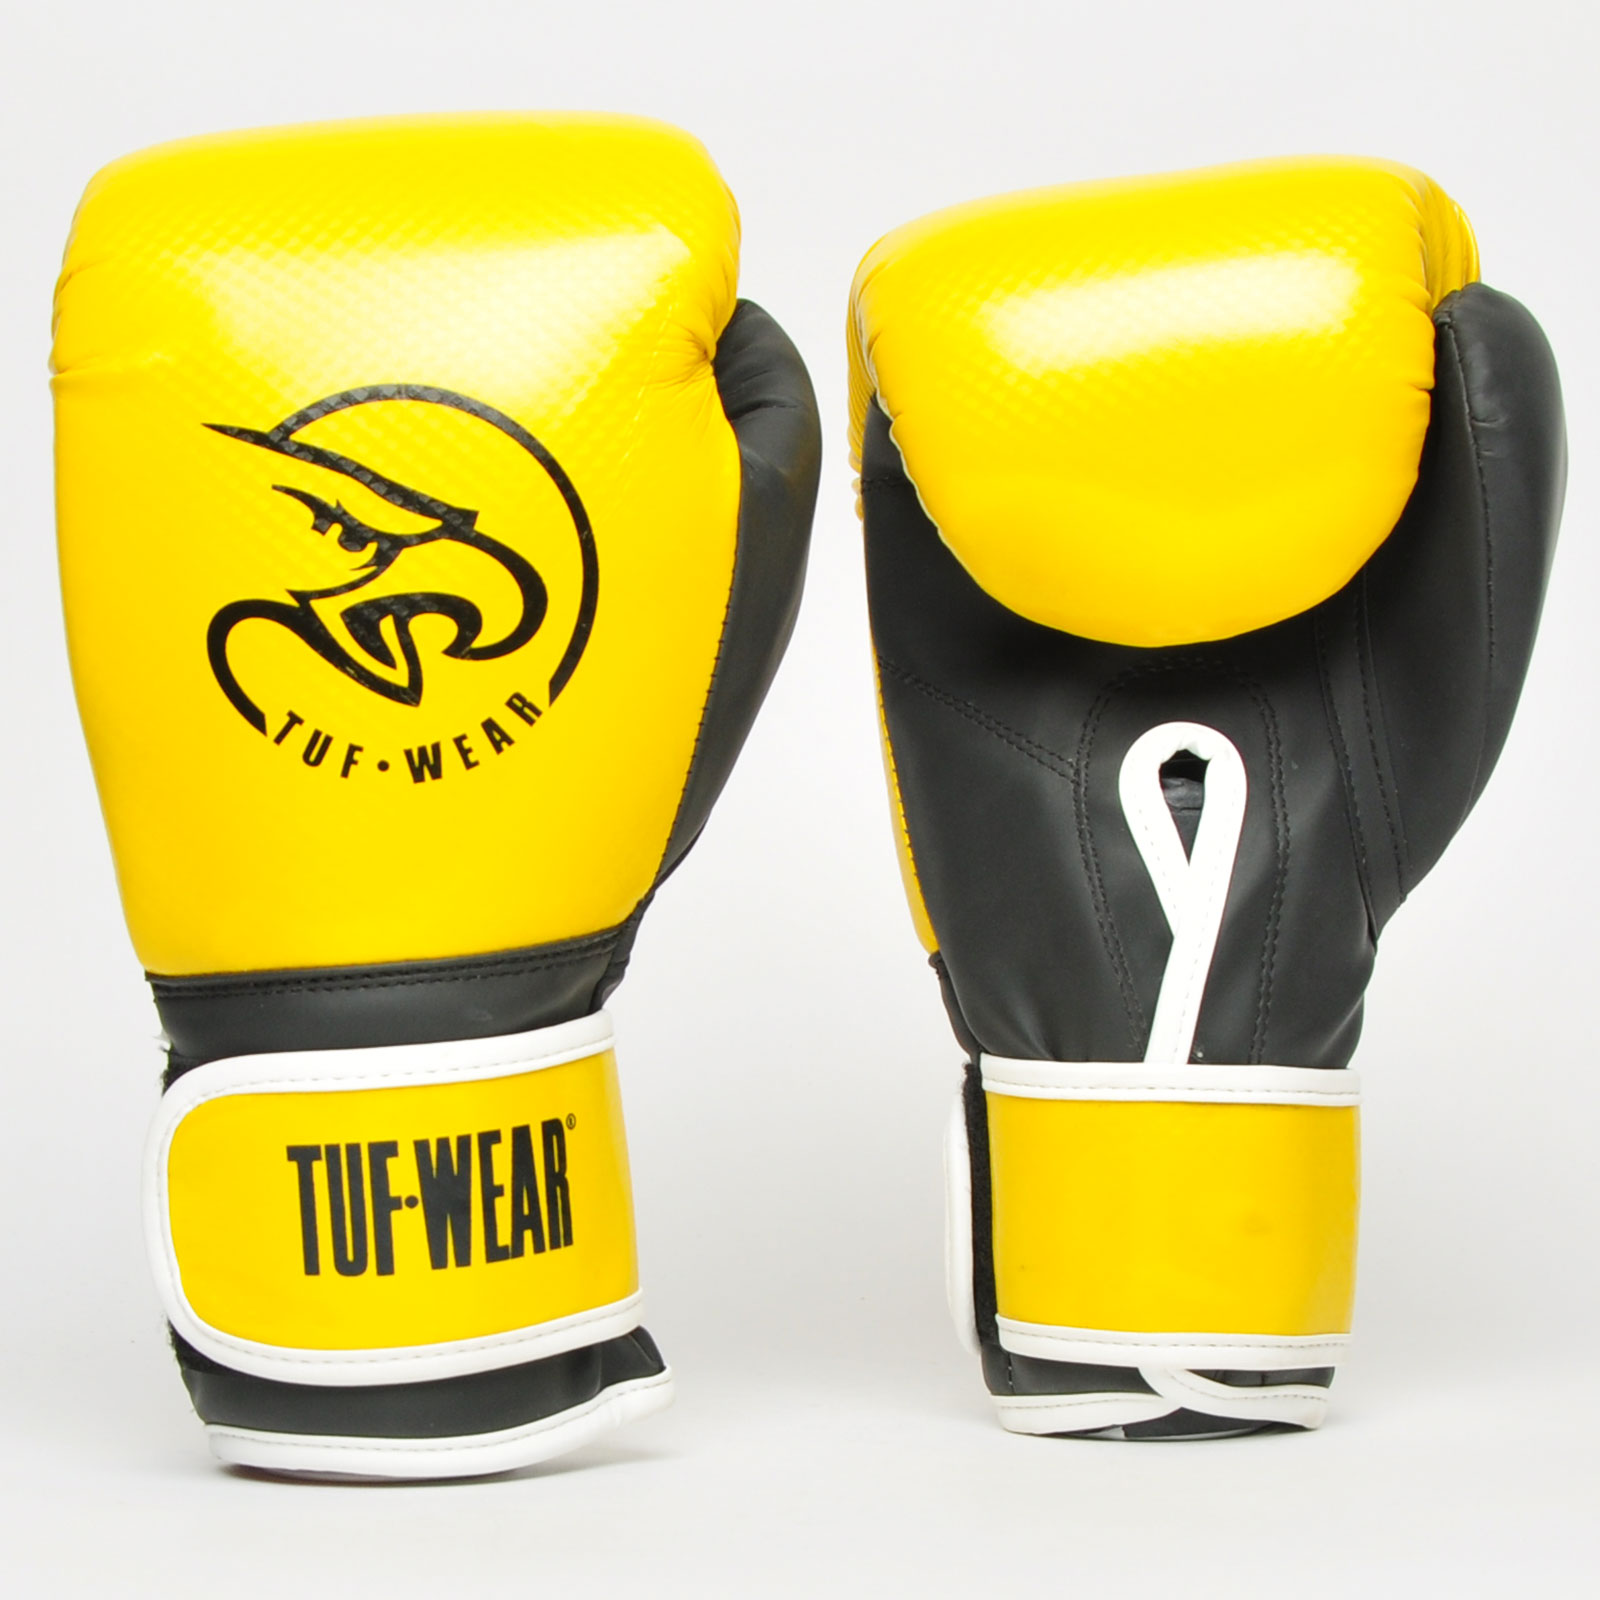 TUF Wear BOXE JUNIOR Punchball Stand con i guanti 